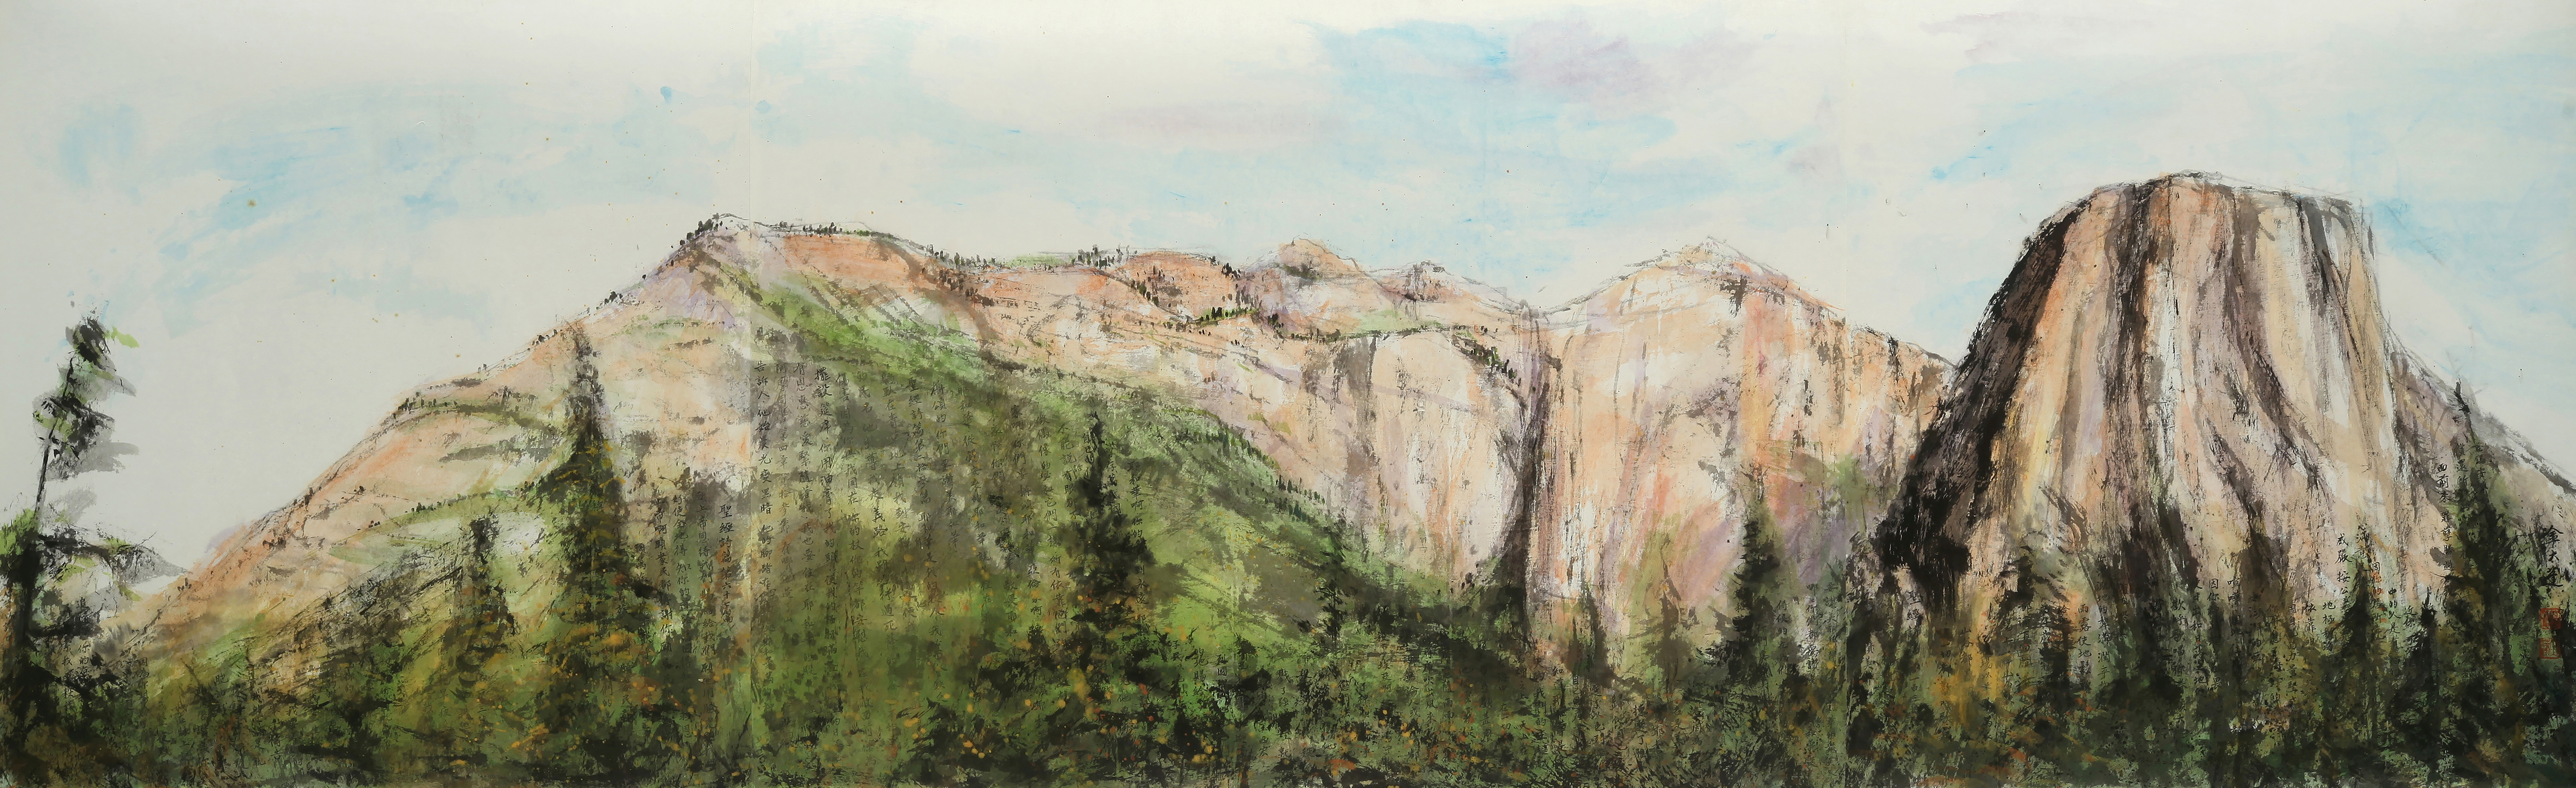 Contemporary Chinese Landscape painting of Yosemite National Park Mountains.